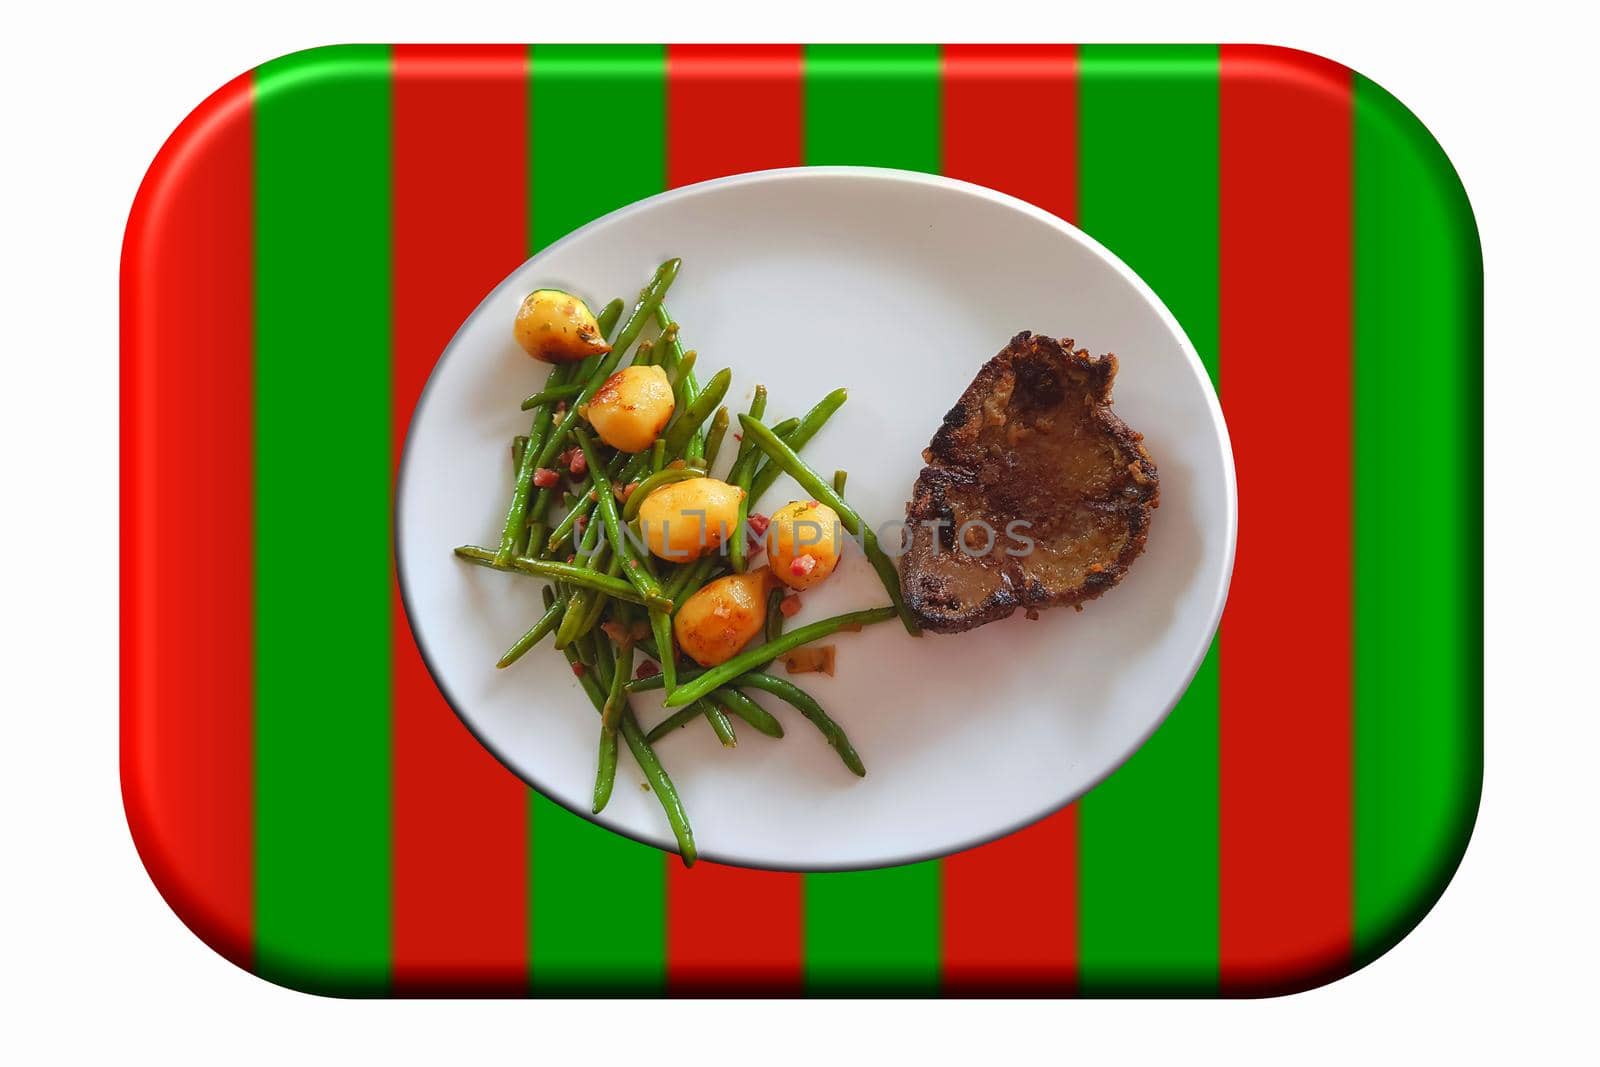 Fried beef liver with vegetables on a white plate on a green-red surface